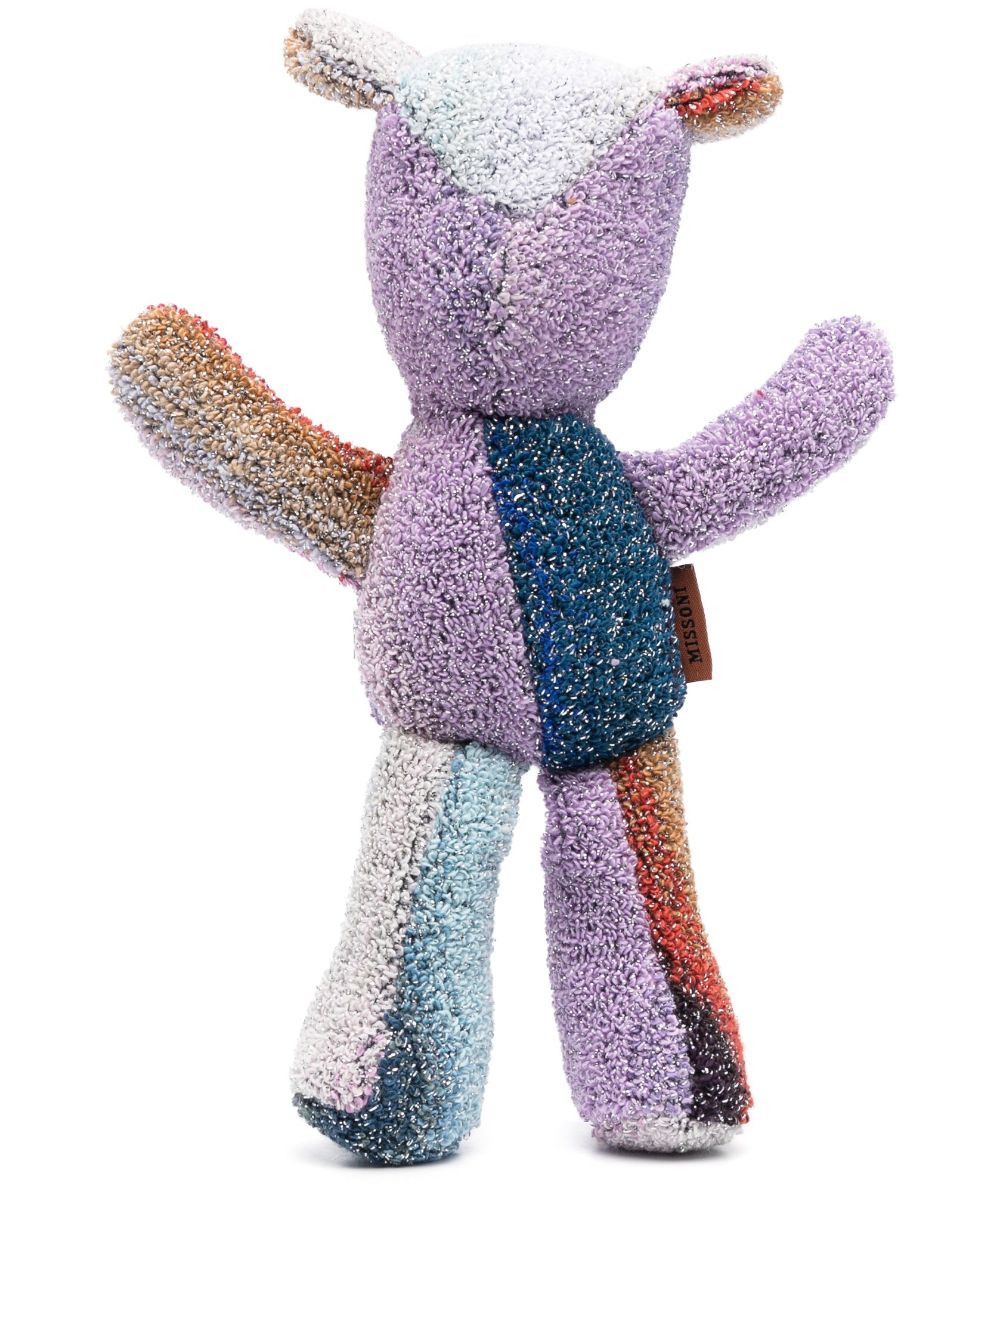 Missoni Patchwork Teddy Bear Collectible In Purple